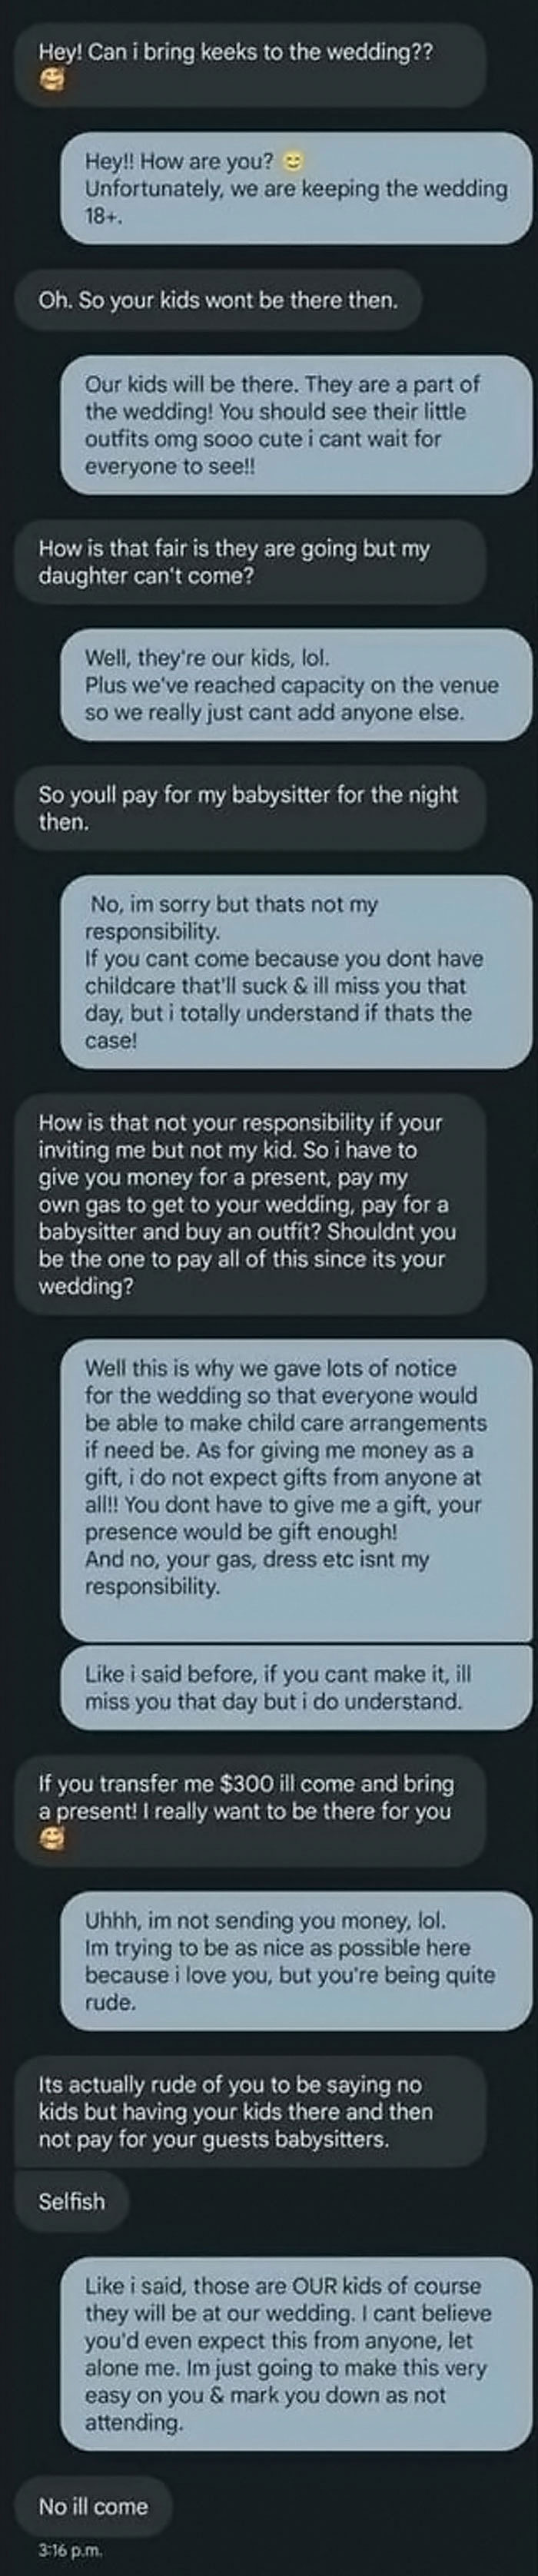 Seen On Socials… I Can’t Believe How Entitled People Can Be! Sorry If Already Posted